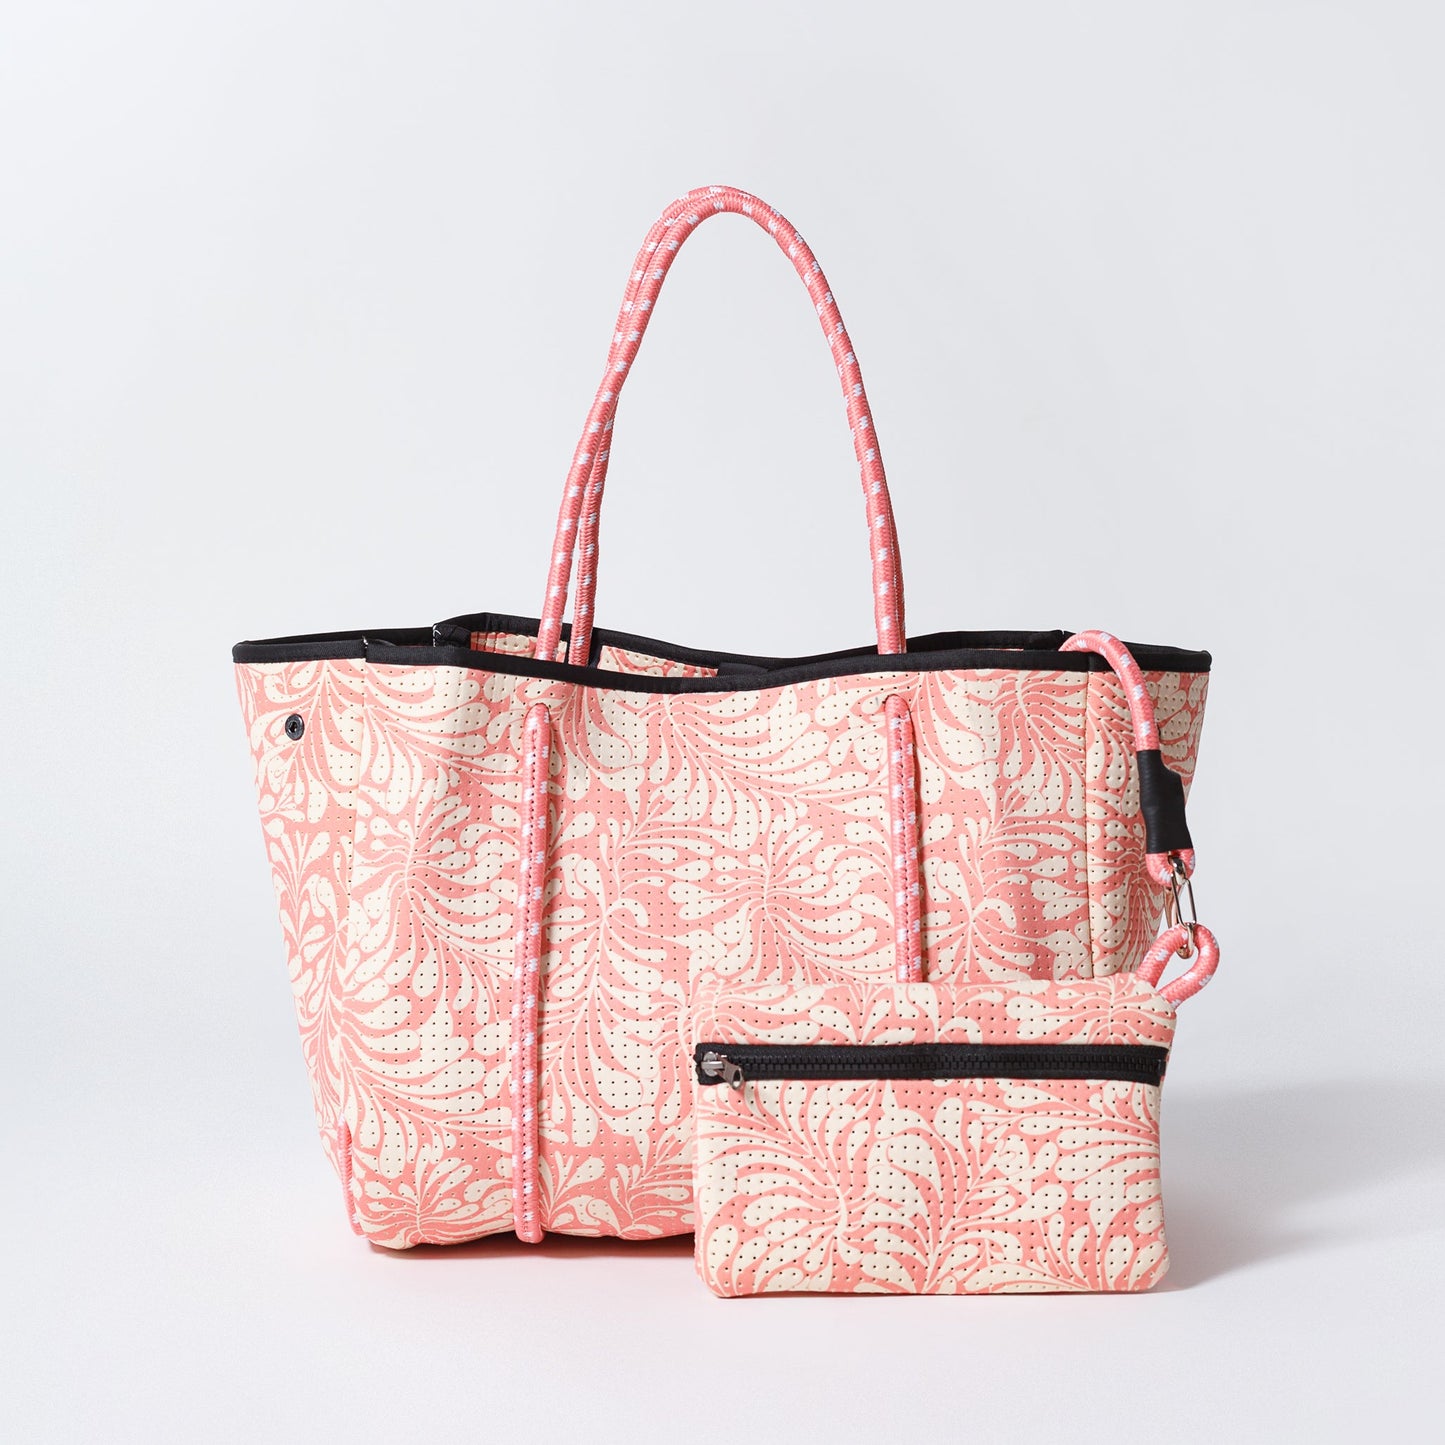 EVERYDAY TOTE PALM DREAMS PINK